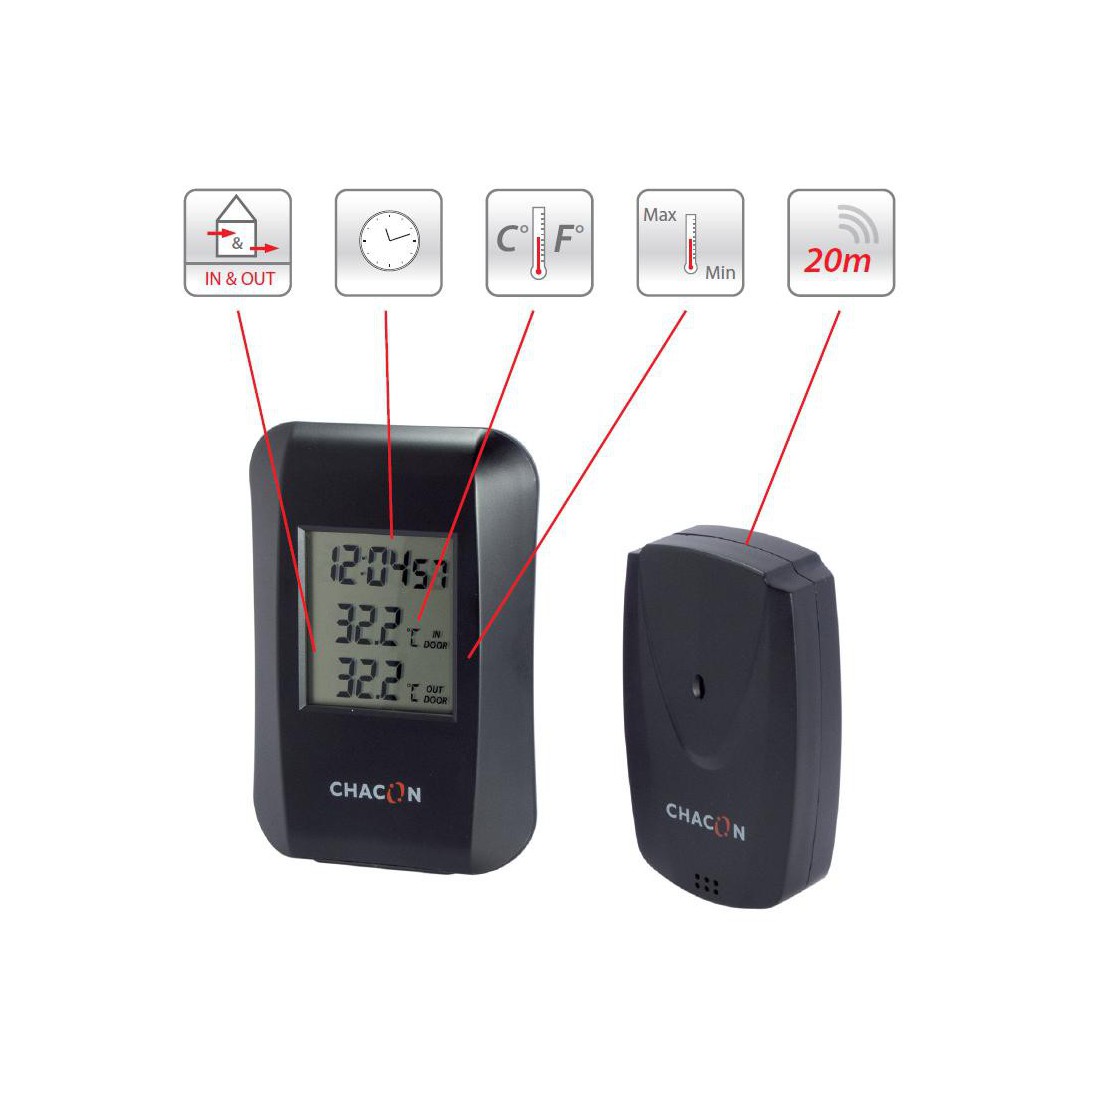 Wireless inside-outside thermometer